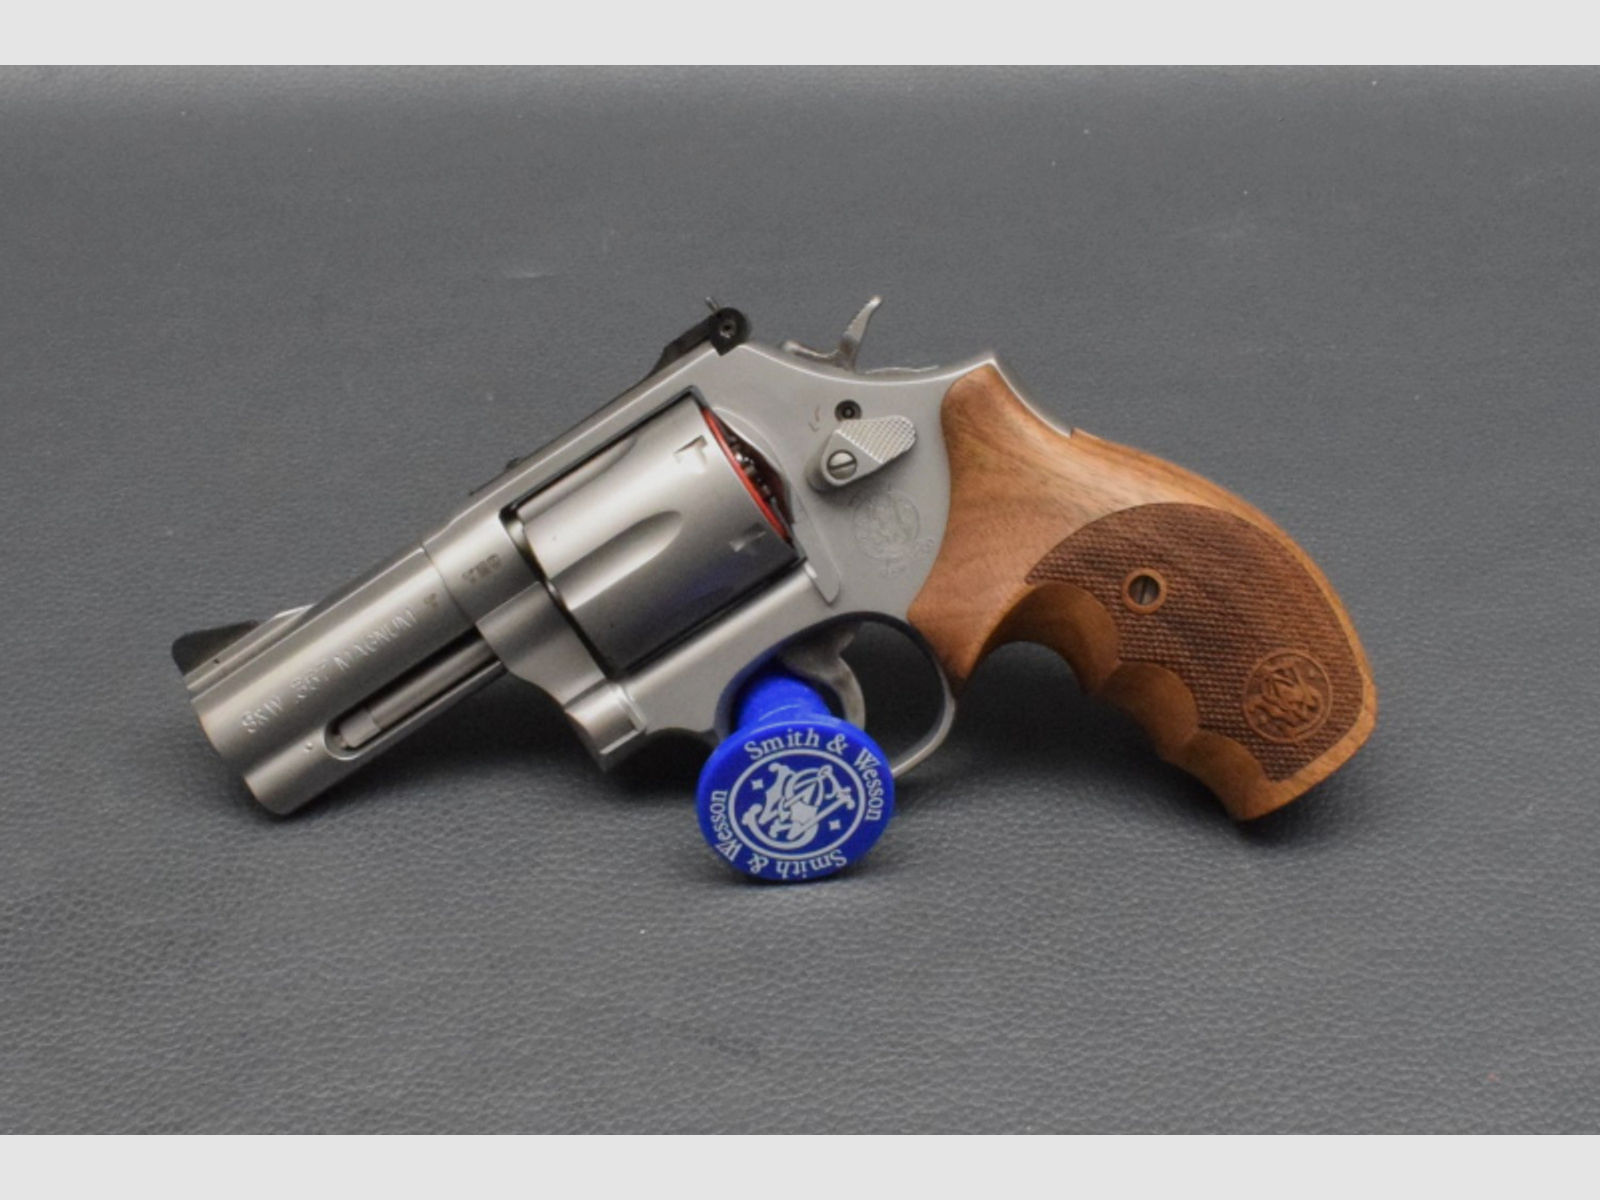 Smith & Wesson Modell 686 Security Special, 357 Magnum, 3" Lauf, Holzgriff, Neuware